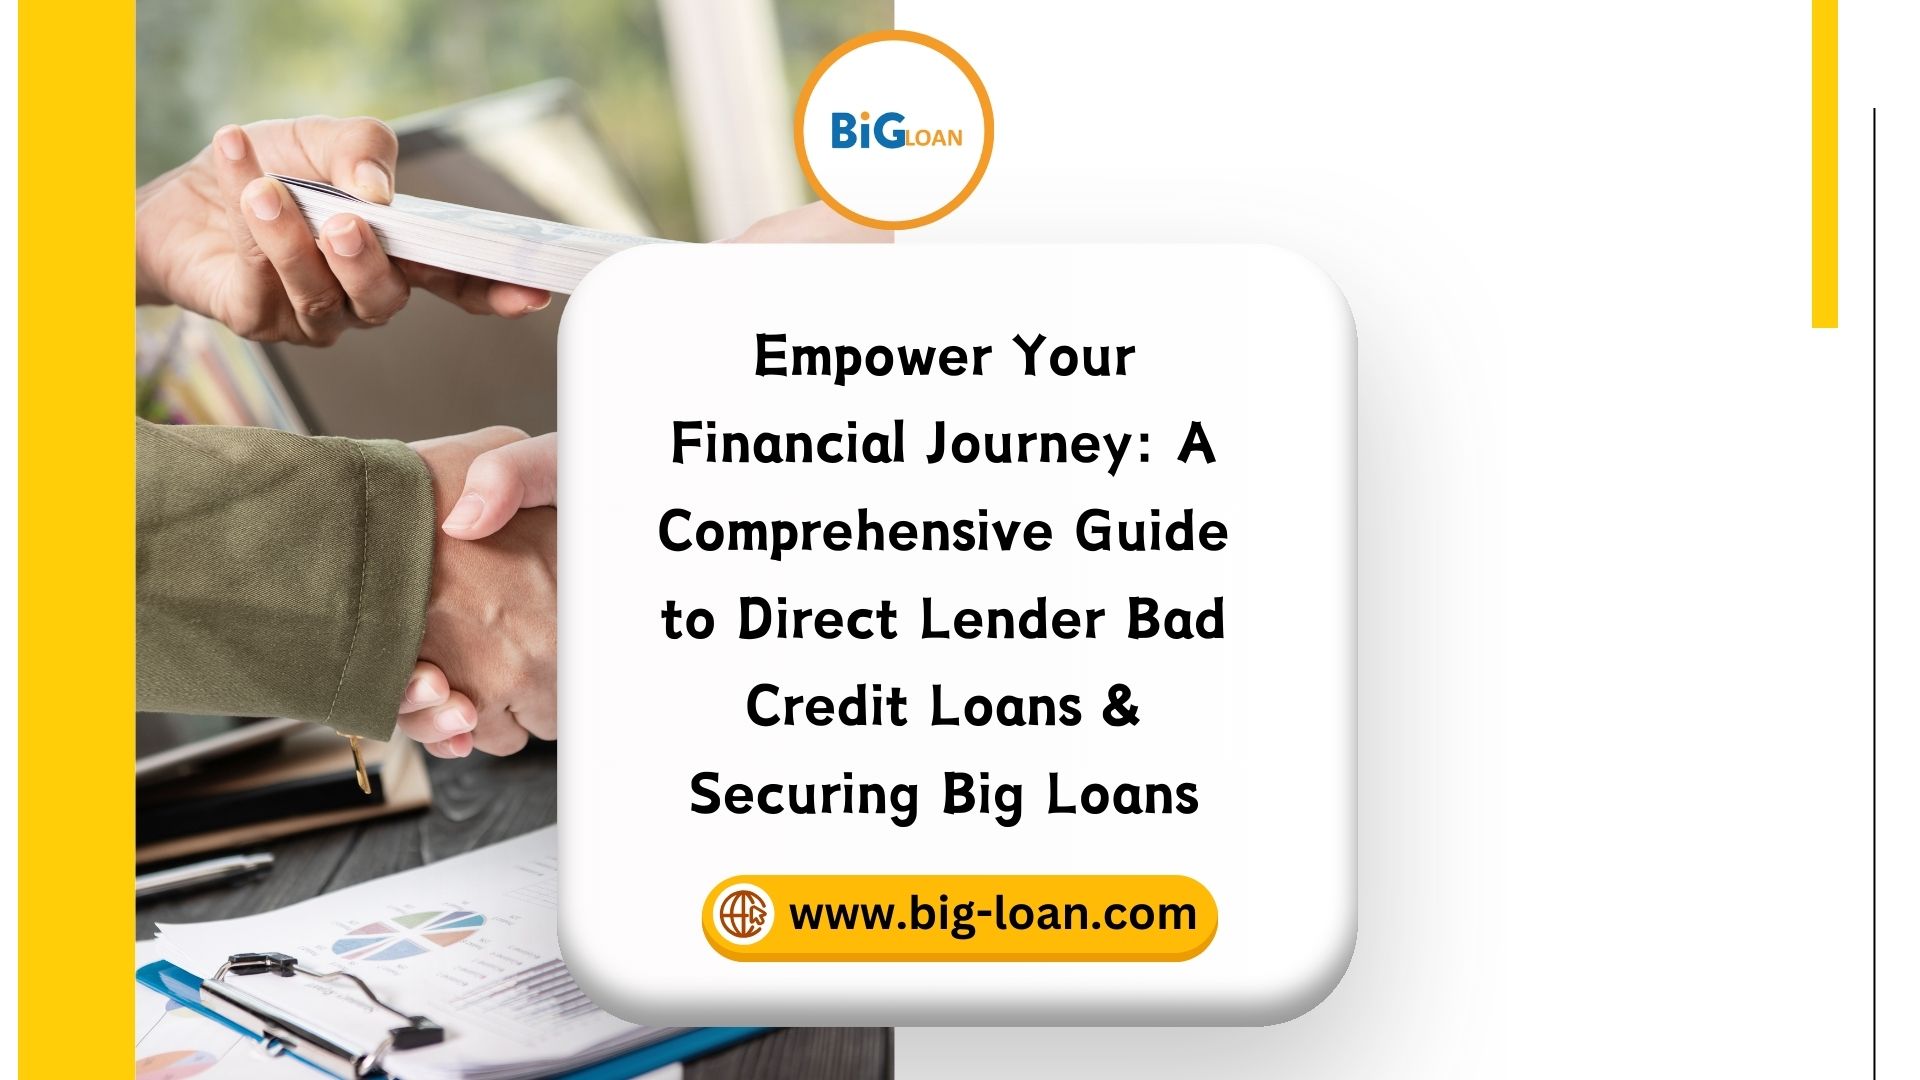  Empower Your Financial Journey: BigLoan's Direct Lender Bad Credit Loans for Immediate Relief